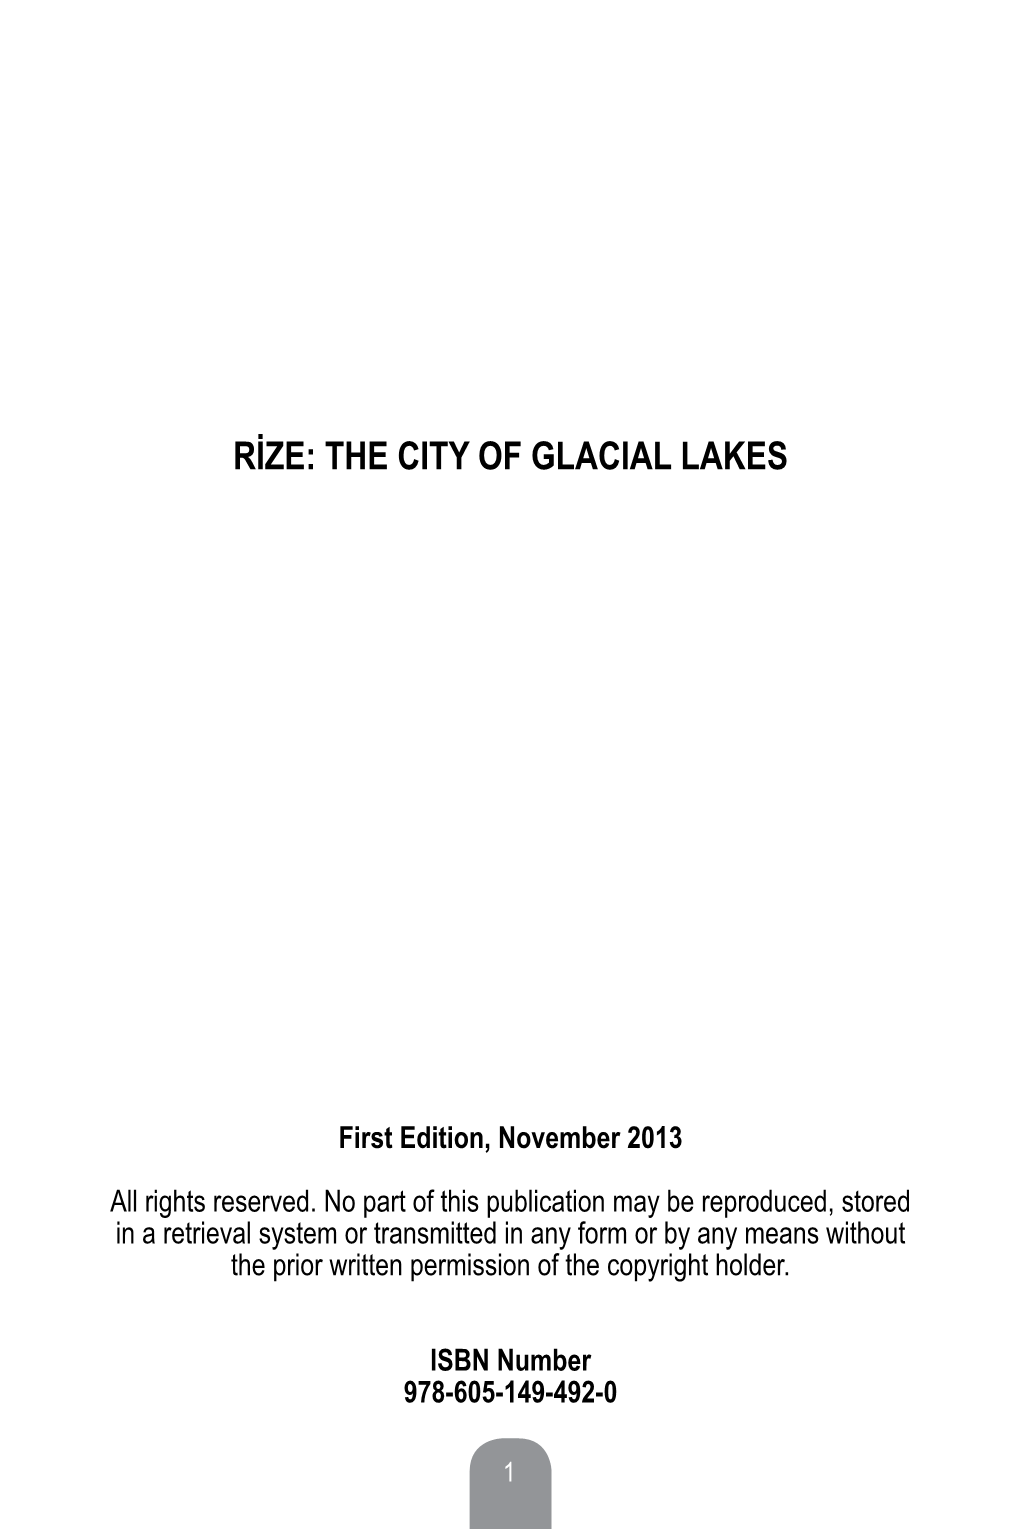 Rize: the City of Glacial Lakes